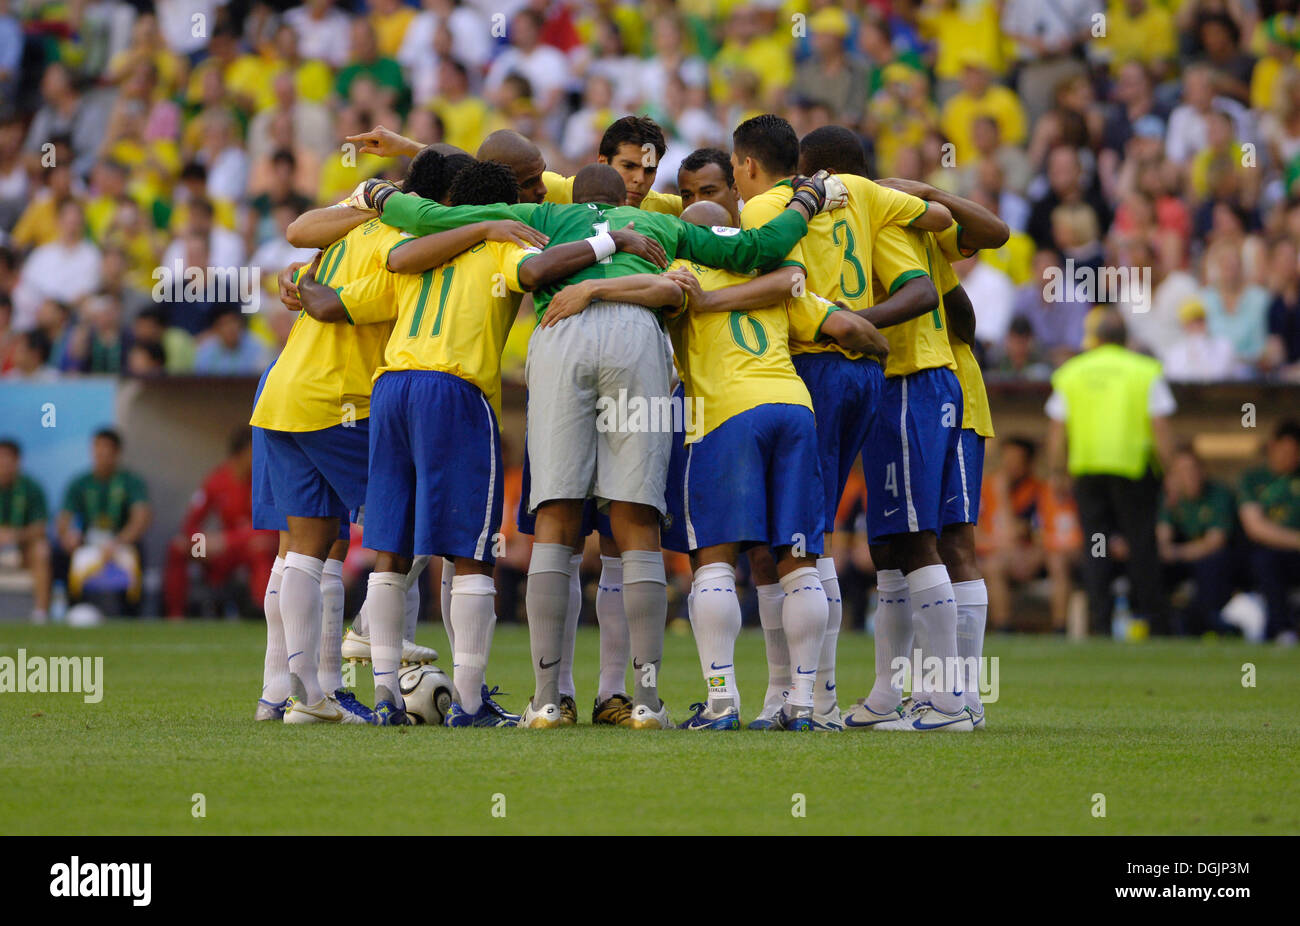 Brazilian national football team Selecao at the World Cup 2006 in Germany Stock Photo